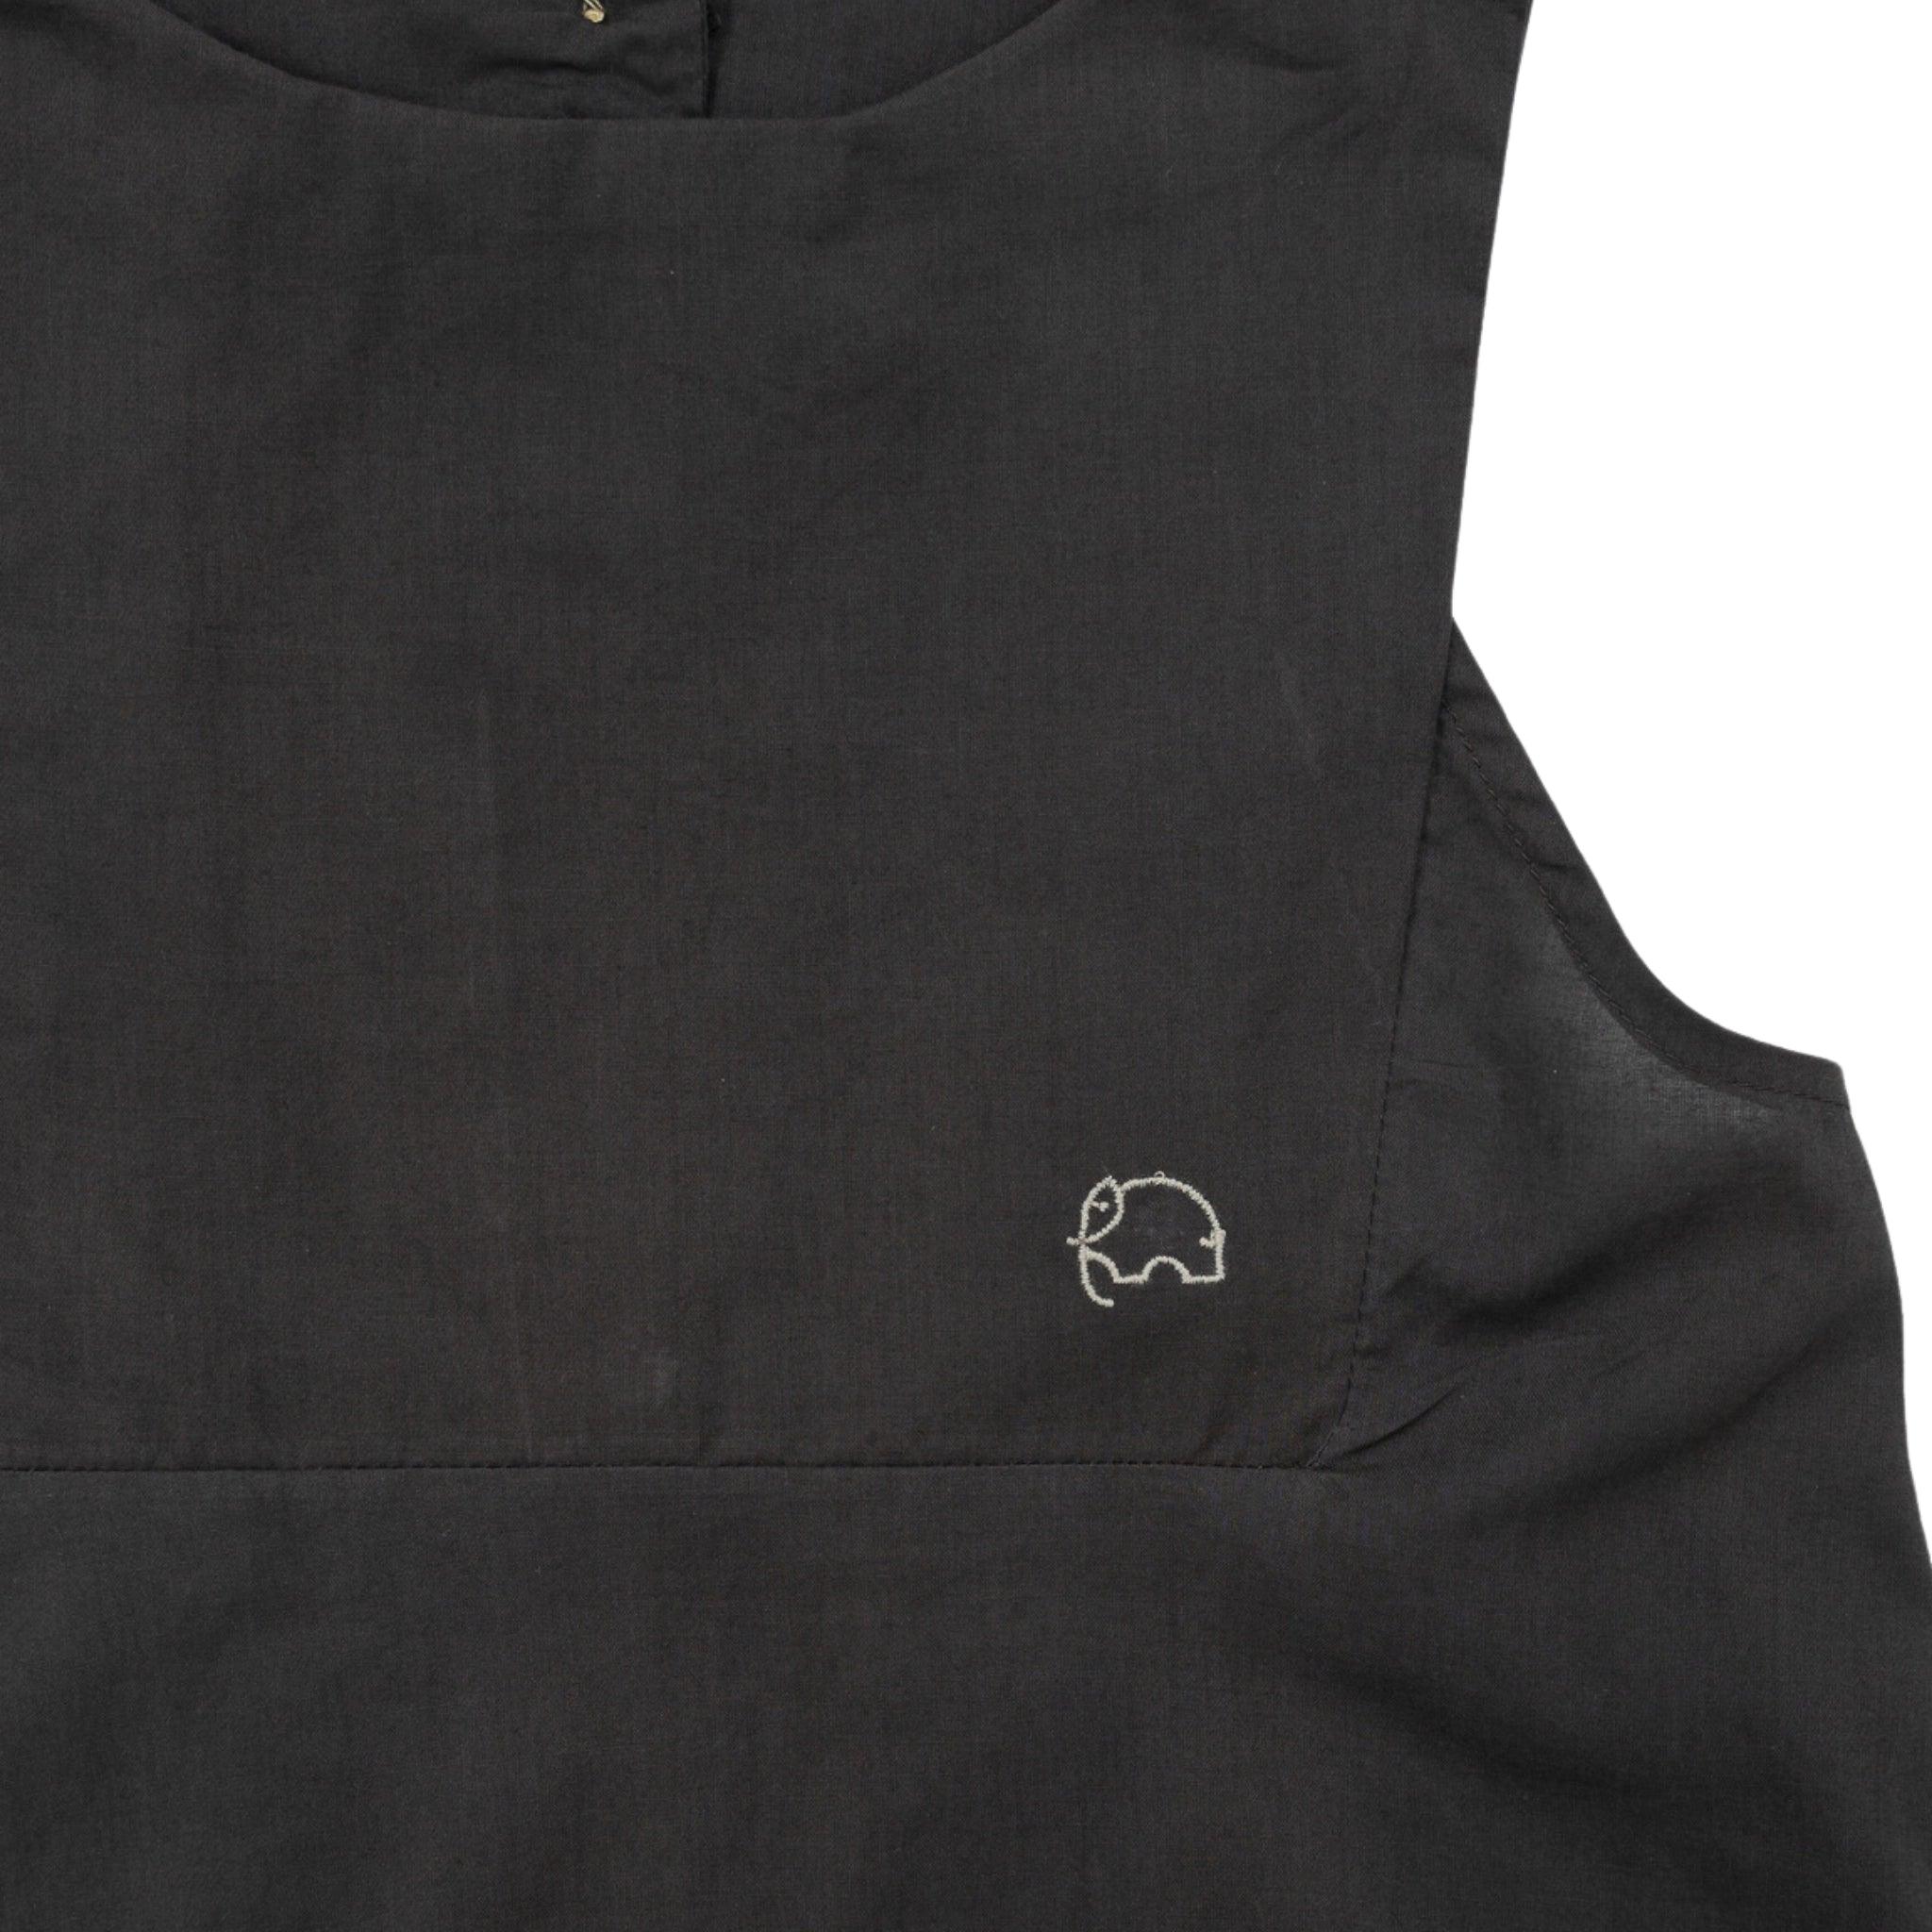 Close-up of a Plum Kitten Cotton Bib Neck Top for Kids by Karee with a small white embroidered car logo near the lower left side, designed as sustainable children’s clothing.